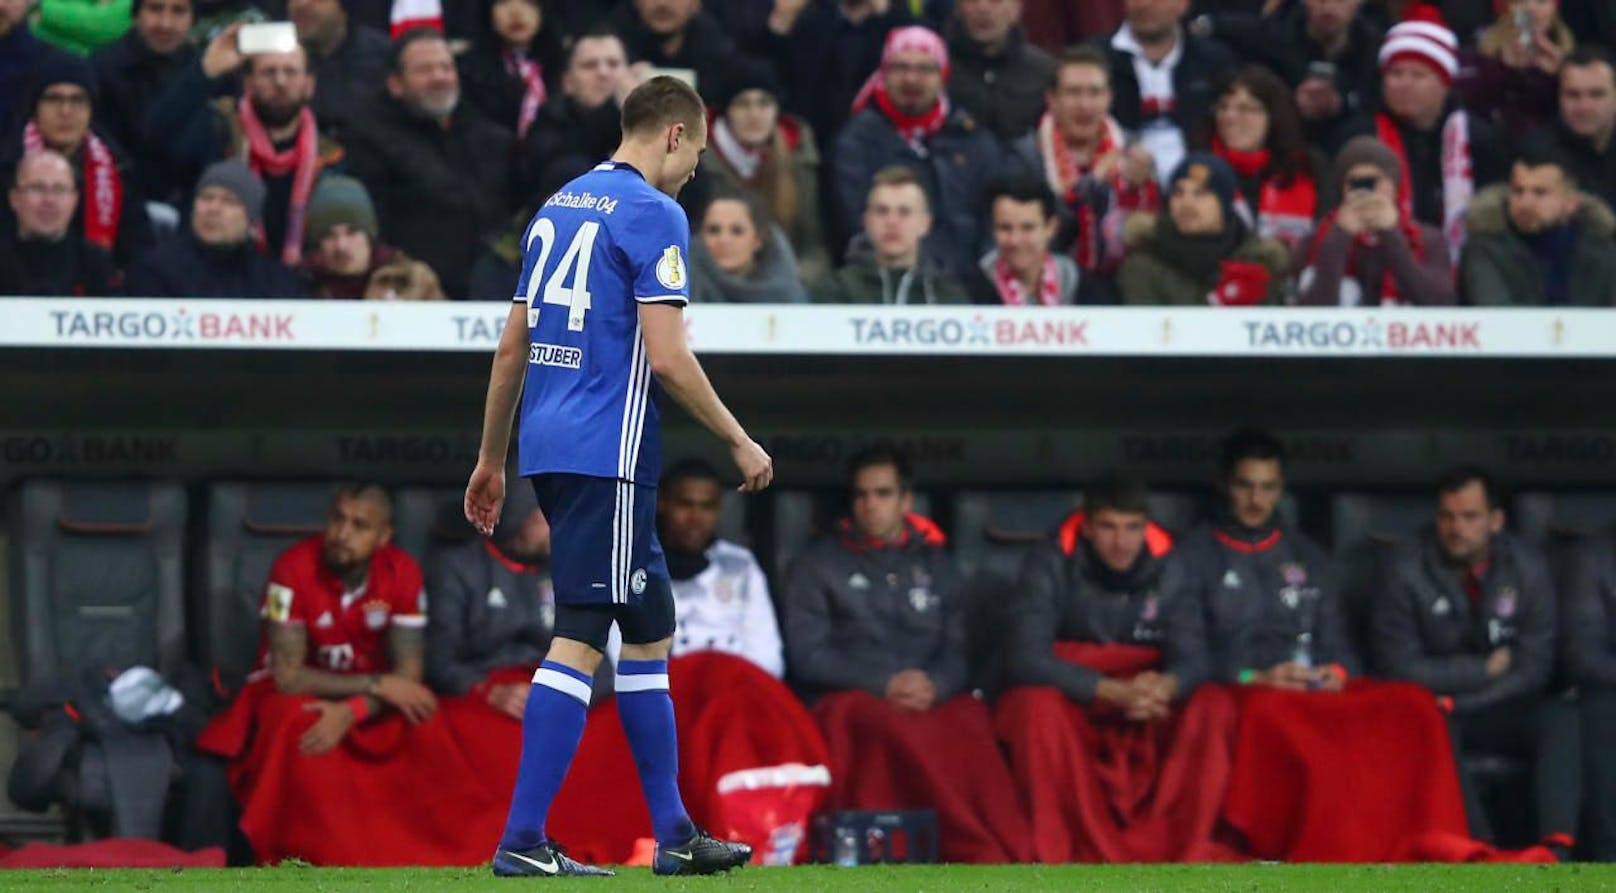 Football Soccer - Bayern Munich v Schalke 04 - German Cup (DFB Pokal) - Allianz Arena Munich, Germany - 1/3/17 - Schalke 04's Holger Badstuber walks past the bench of Bayern Munich after being sent off by a yellow-red card.             REUTERS/Michael Dalder      DFB RULES PROHIBIT USE IN MMS SERVICES VIA HANDHELD DEVICES UNTIL TWO HOURS AFTER A MATCH AND ANY USAGE ON INTERNET OR ONLINE MEDIA SIMULATING VIDEO FOOTAGE DURING THE MATCH. - RTS111F8